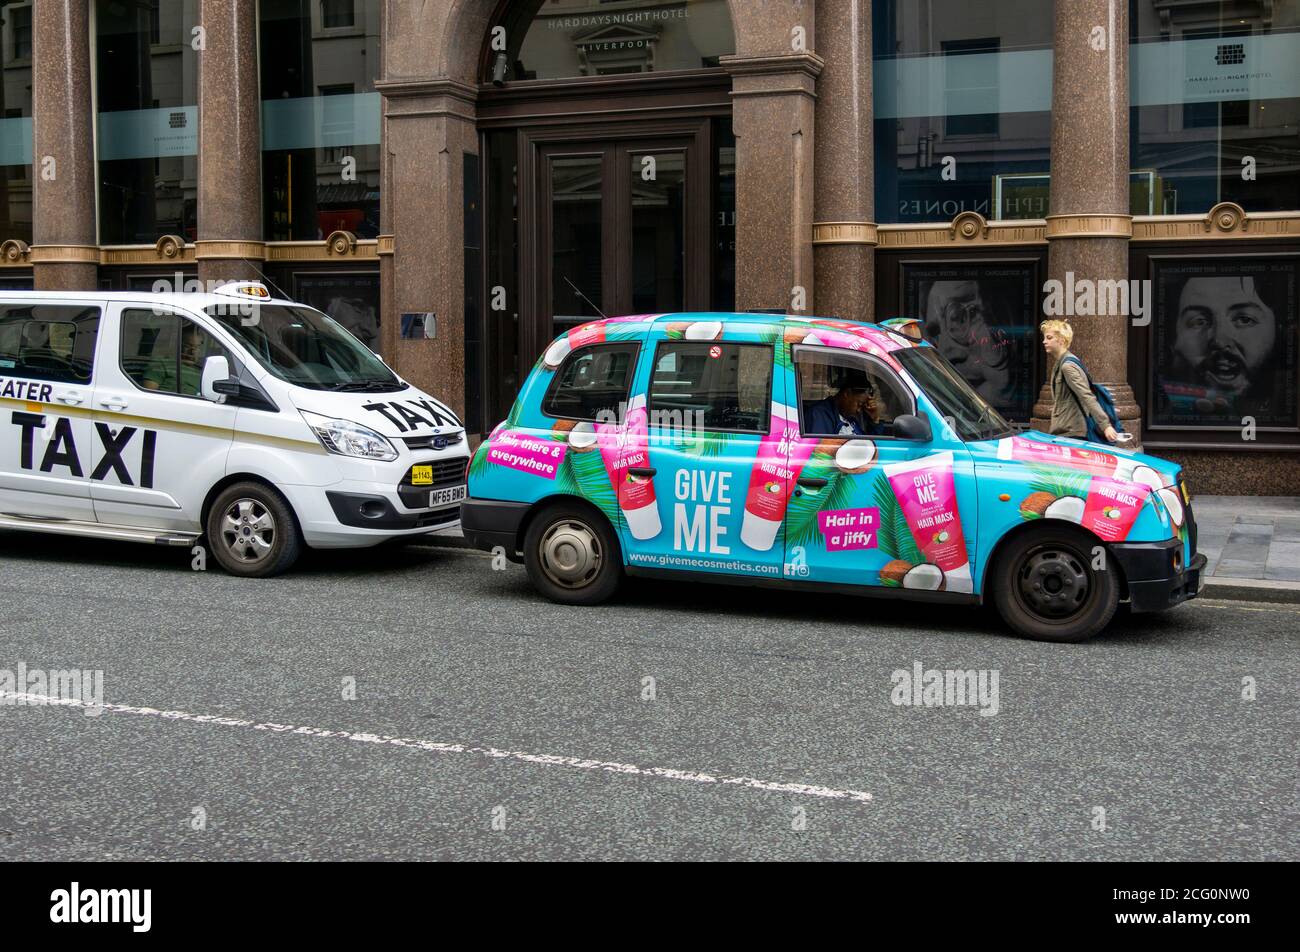 Taxis outside the Hard Days Night Hotel in Liverpool Stock Photo